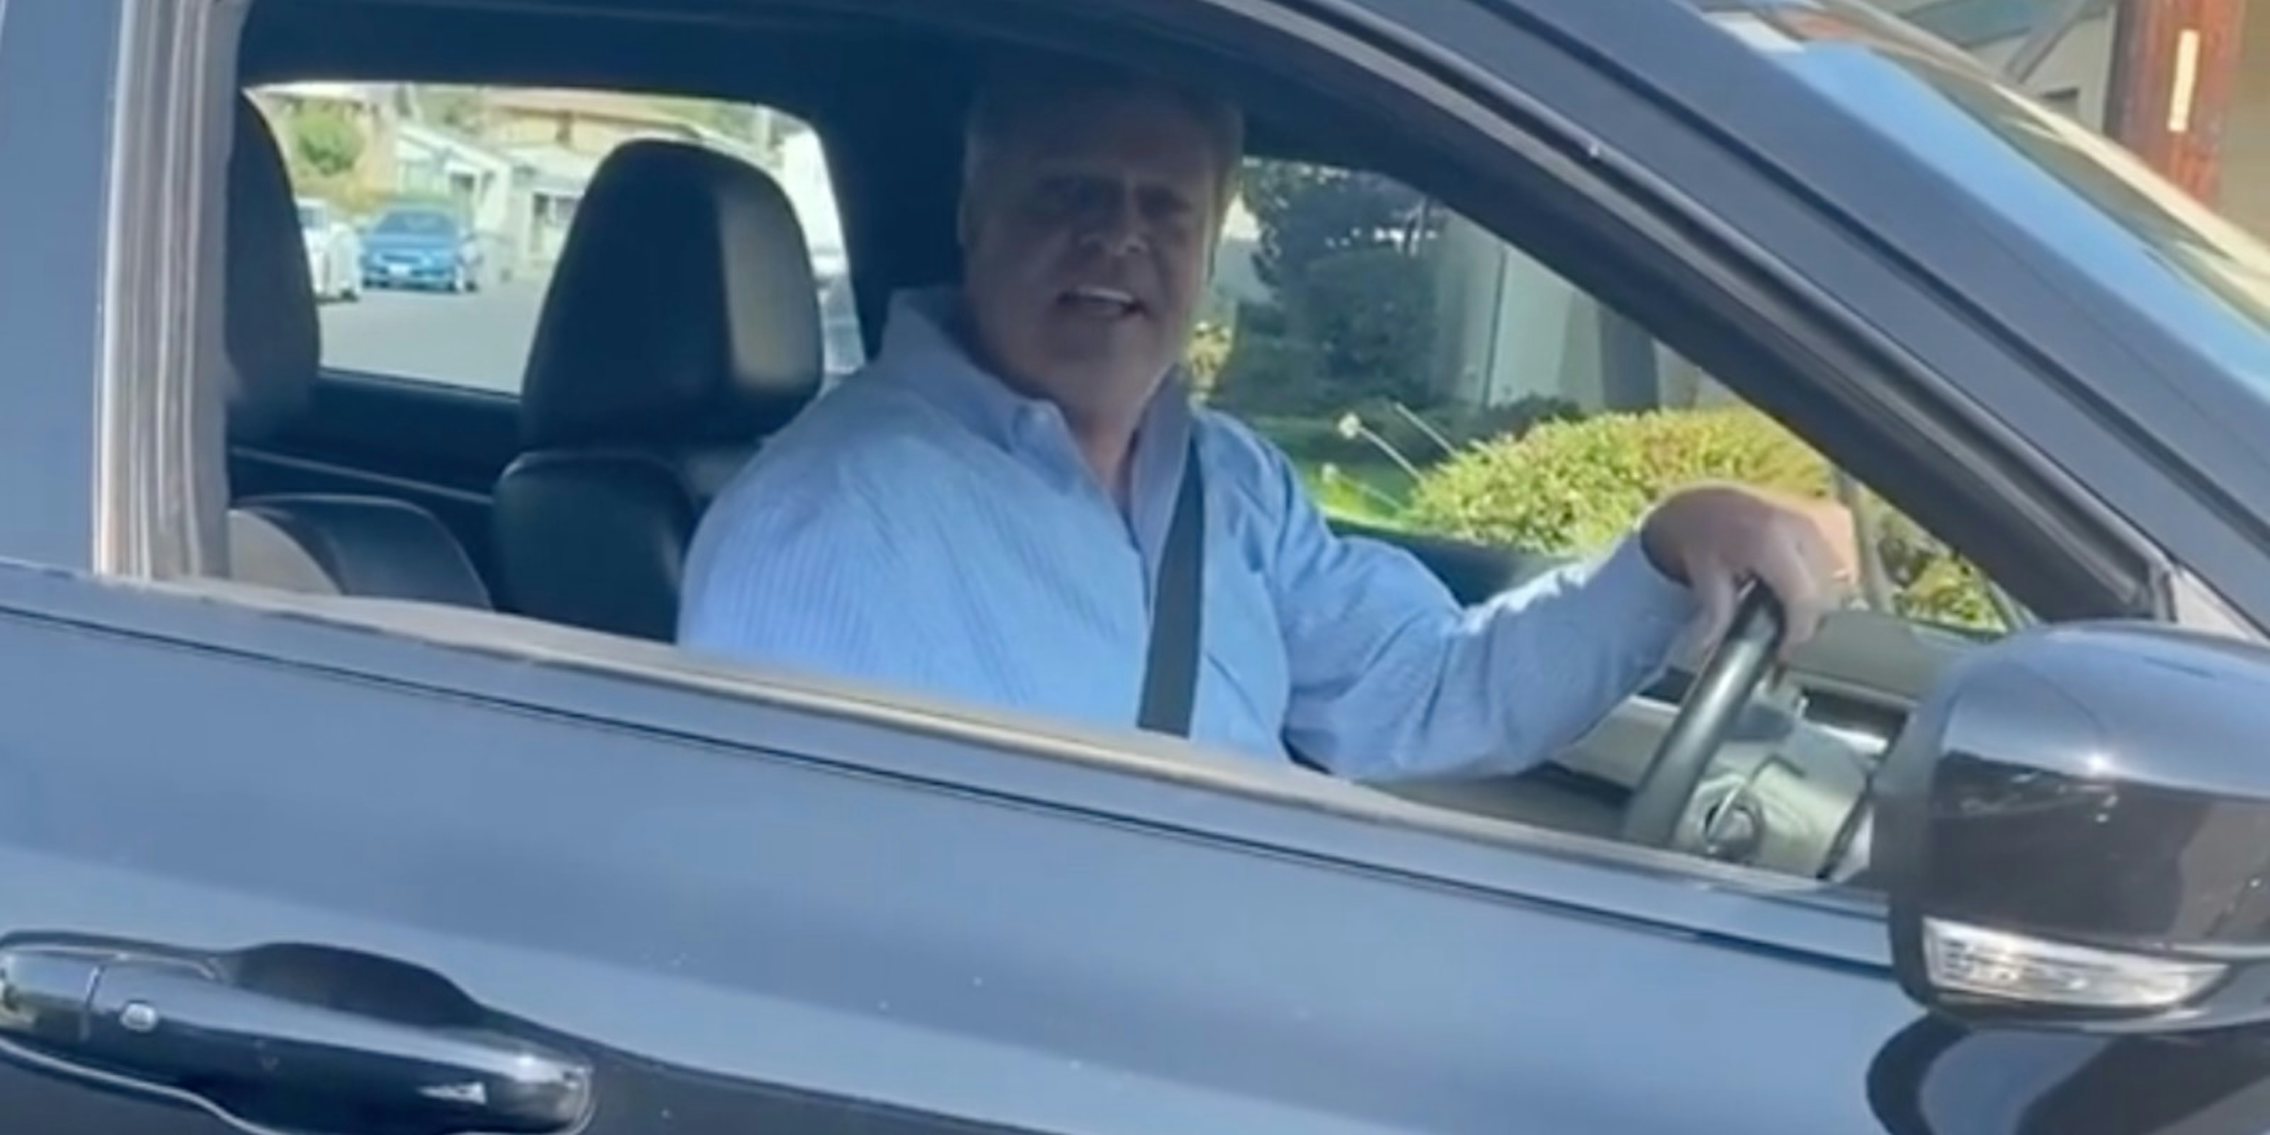 White man who reportedly introduced himself as off-duty cop seen hurling N-word at Black driver